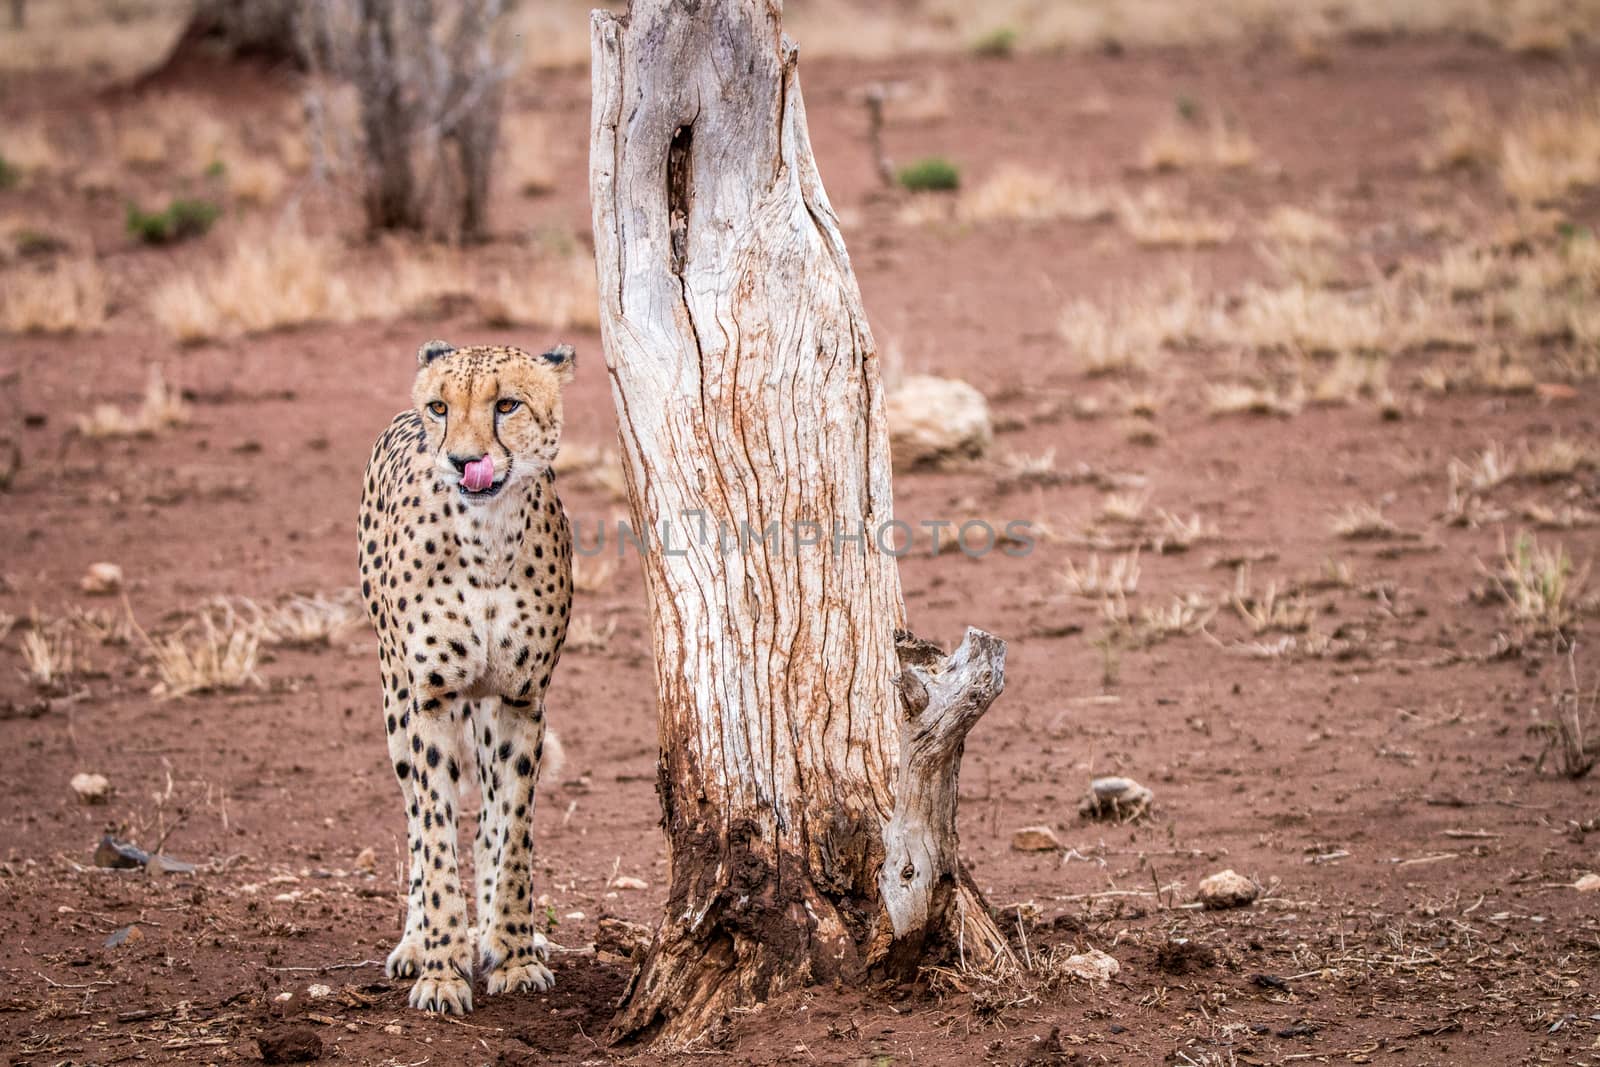 Starring Cheetah in the Kruger National Park, South Africa.